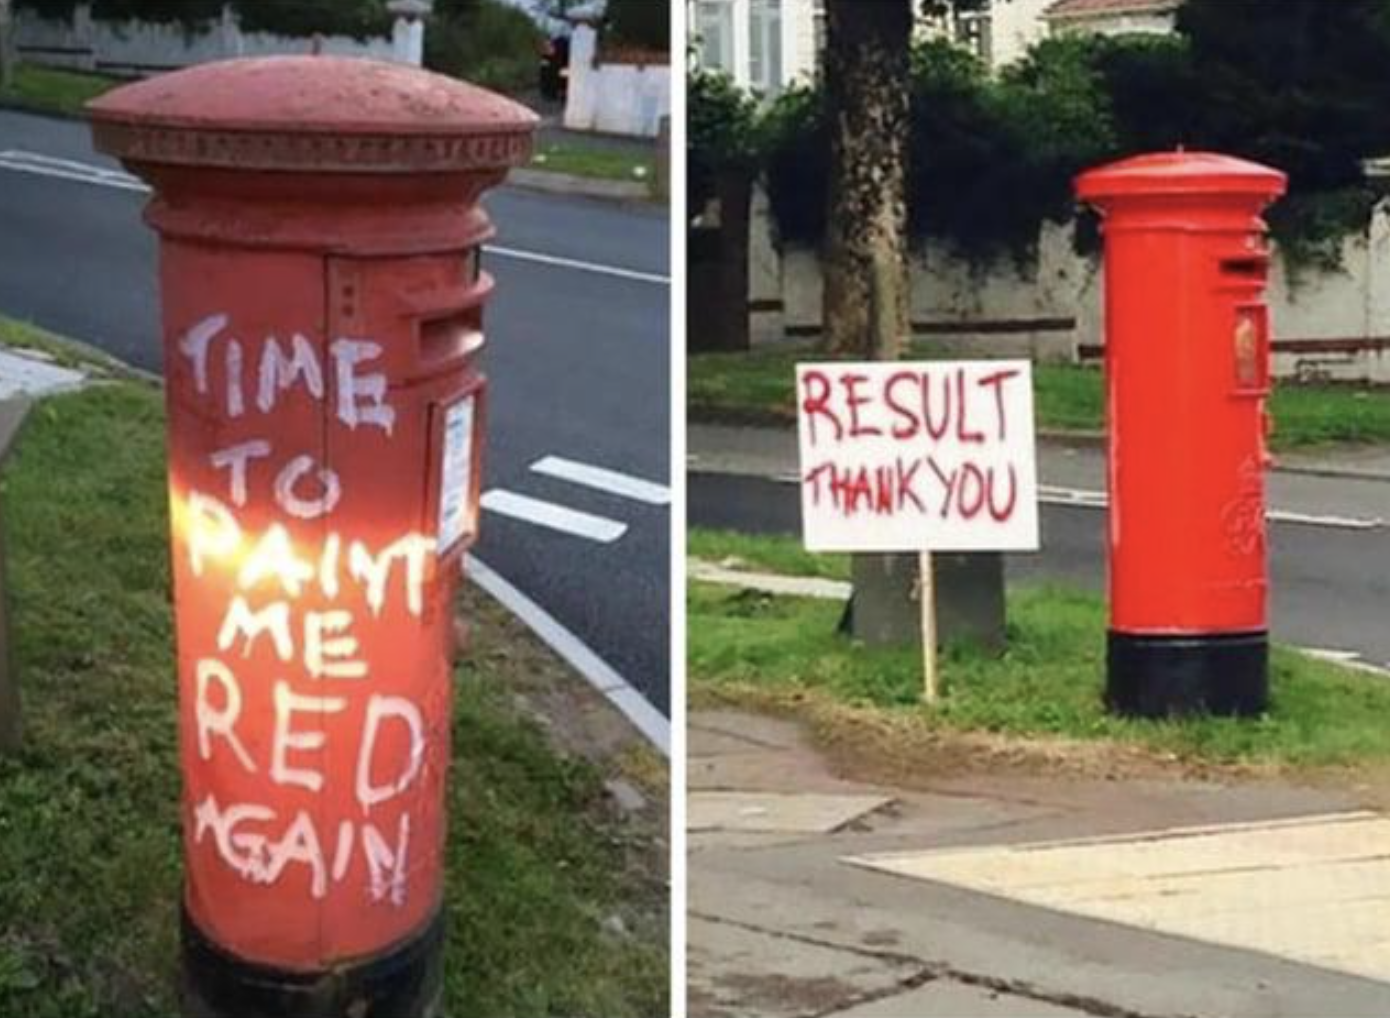 Two images: a red post box with &quot;TIME TO PAINT ME RED AGAIN&quot; and another with &quot;RESULT THANK YOU&quot; sign after repaint